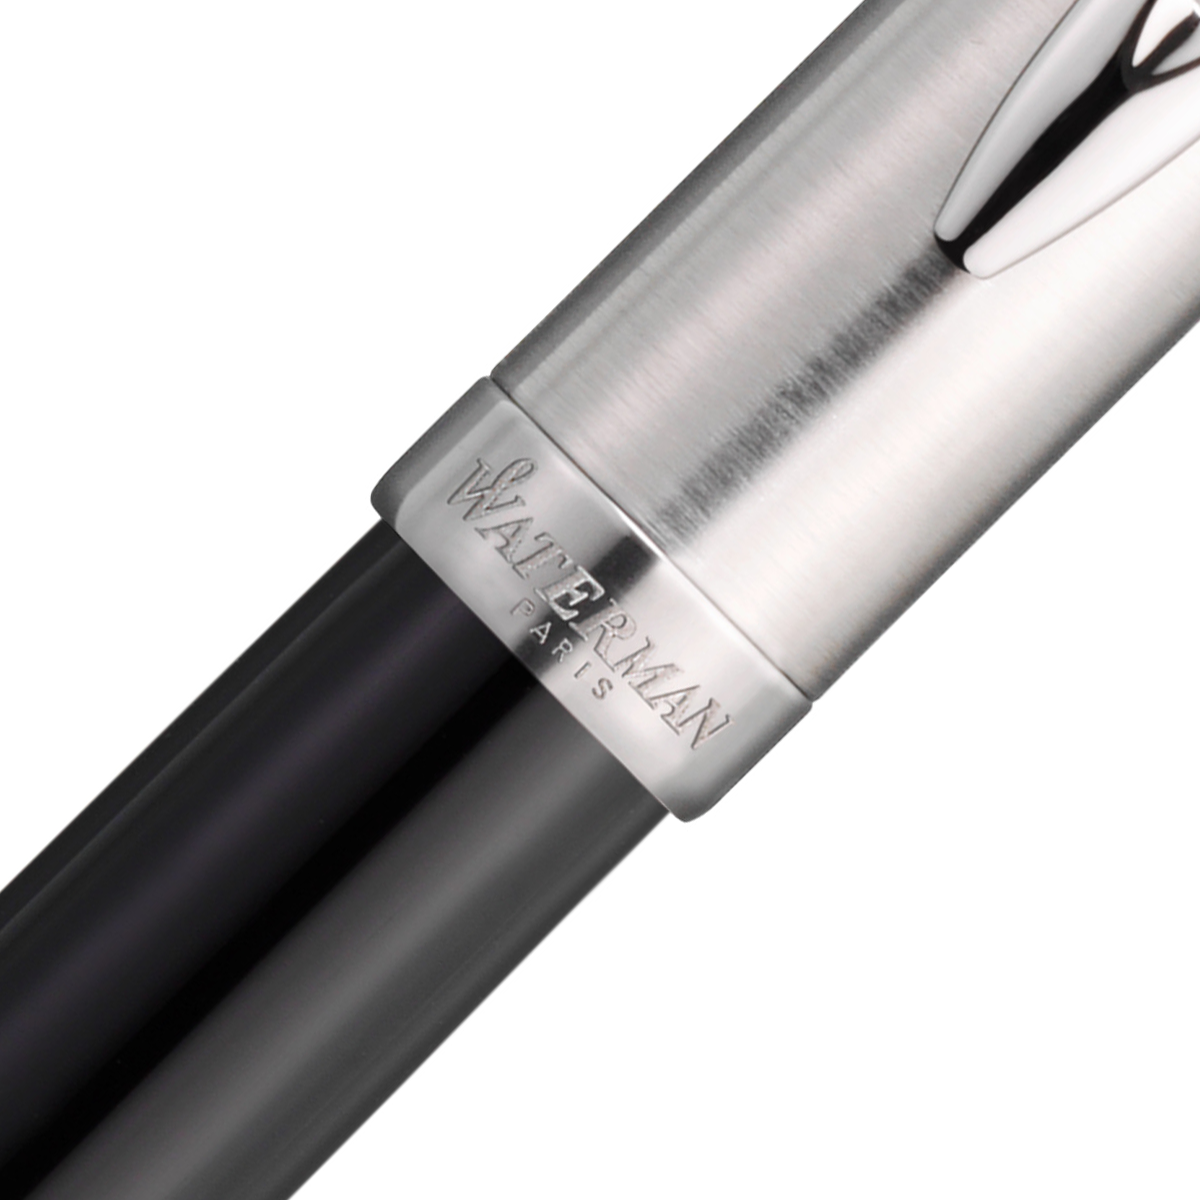 Emblème Black/Chrome Rollerball in the group Pens / Fine Writing / Rollerball Pens at Pen Store (128046)